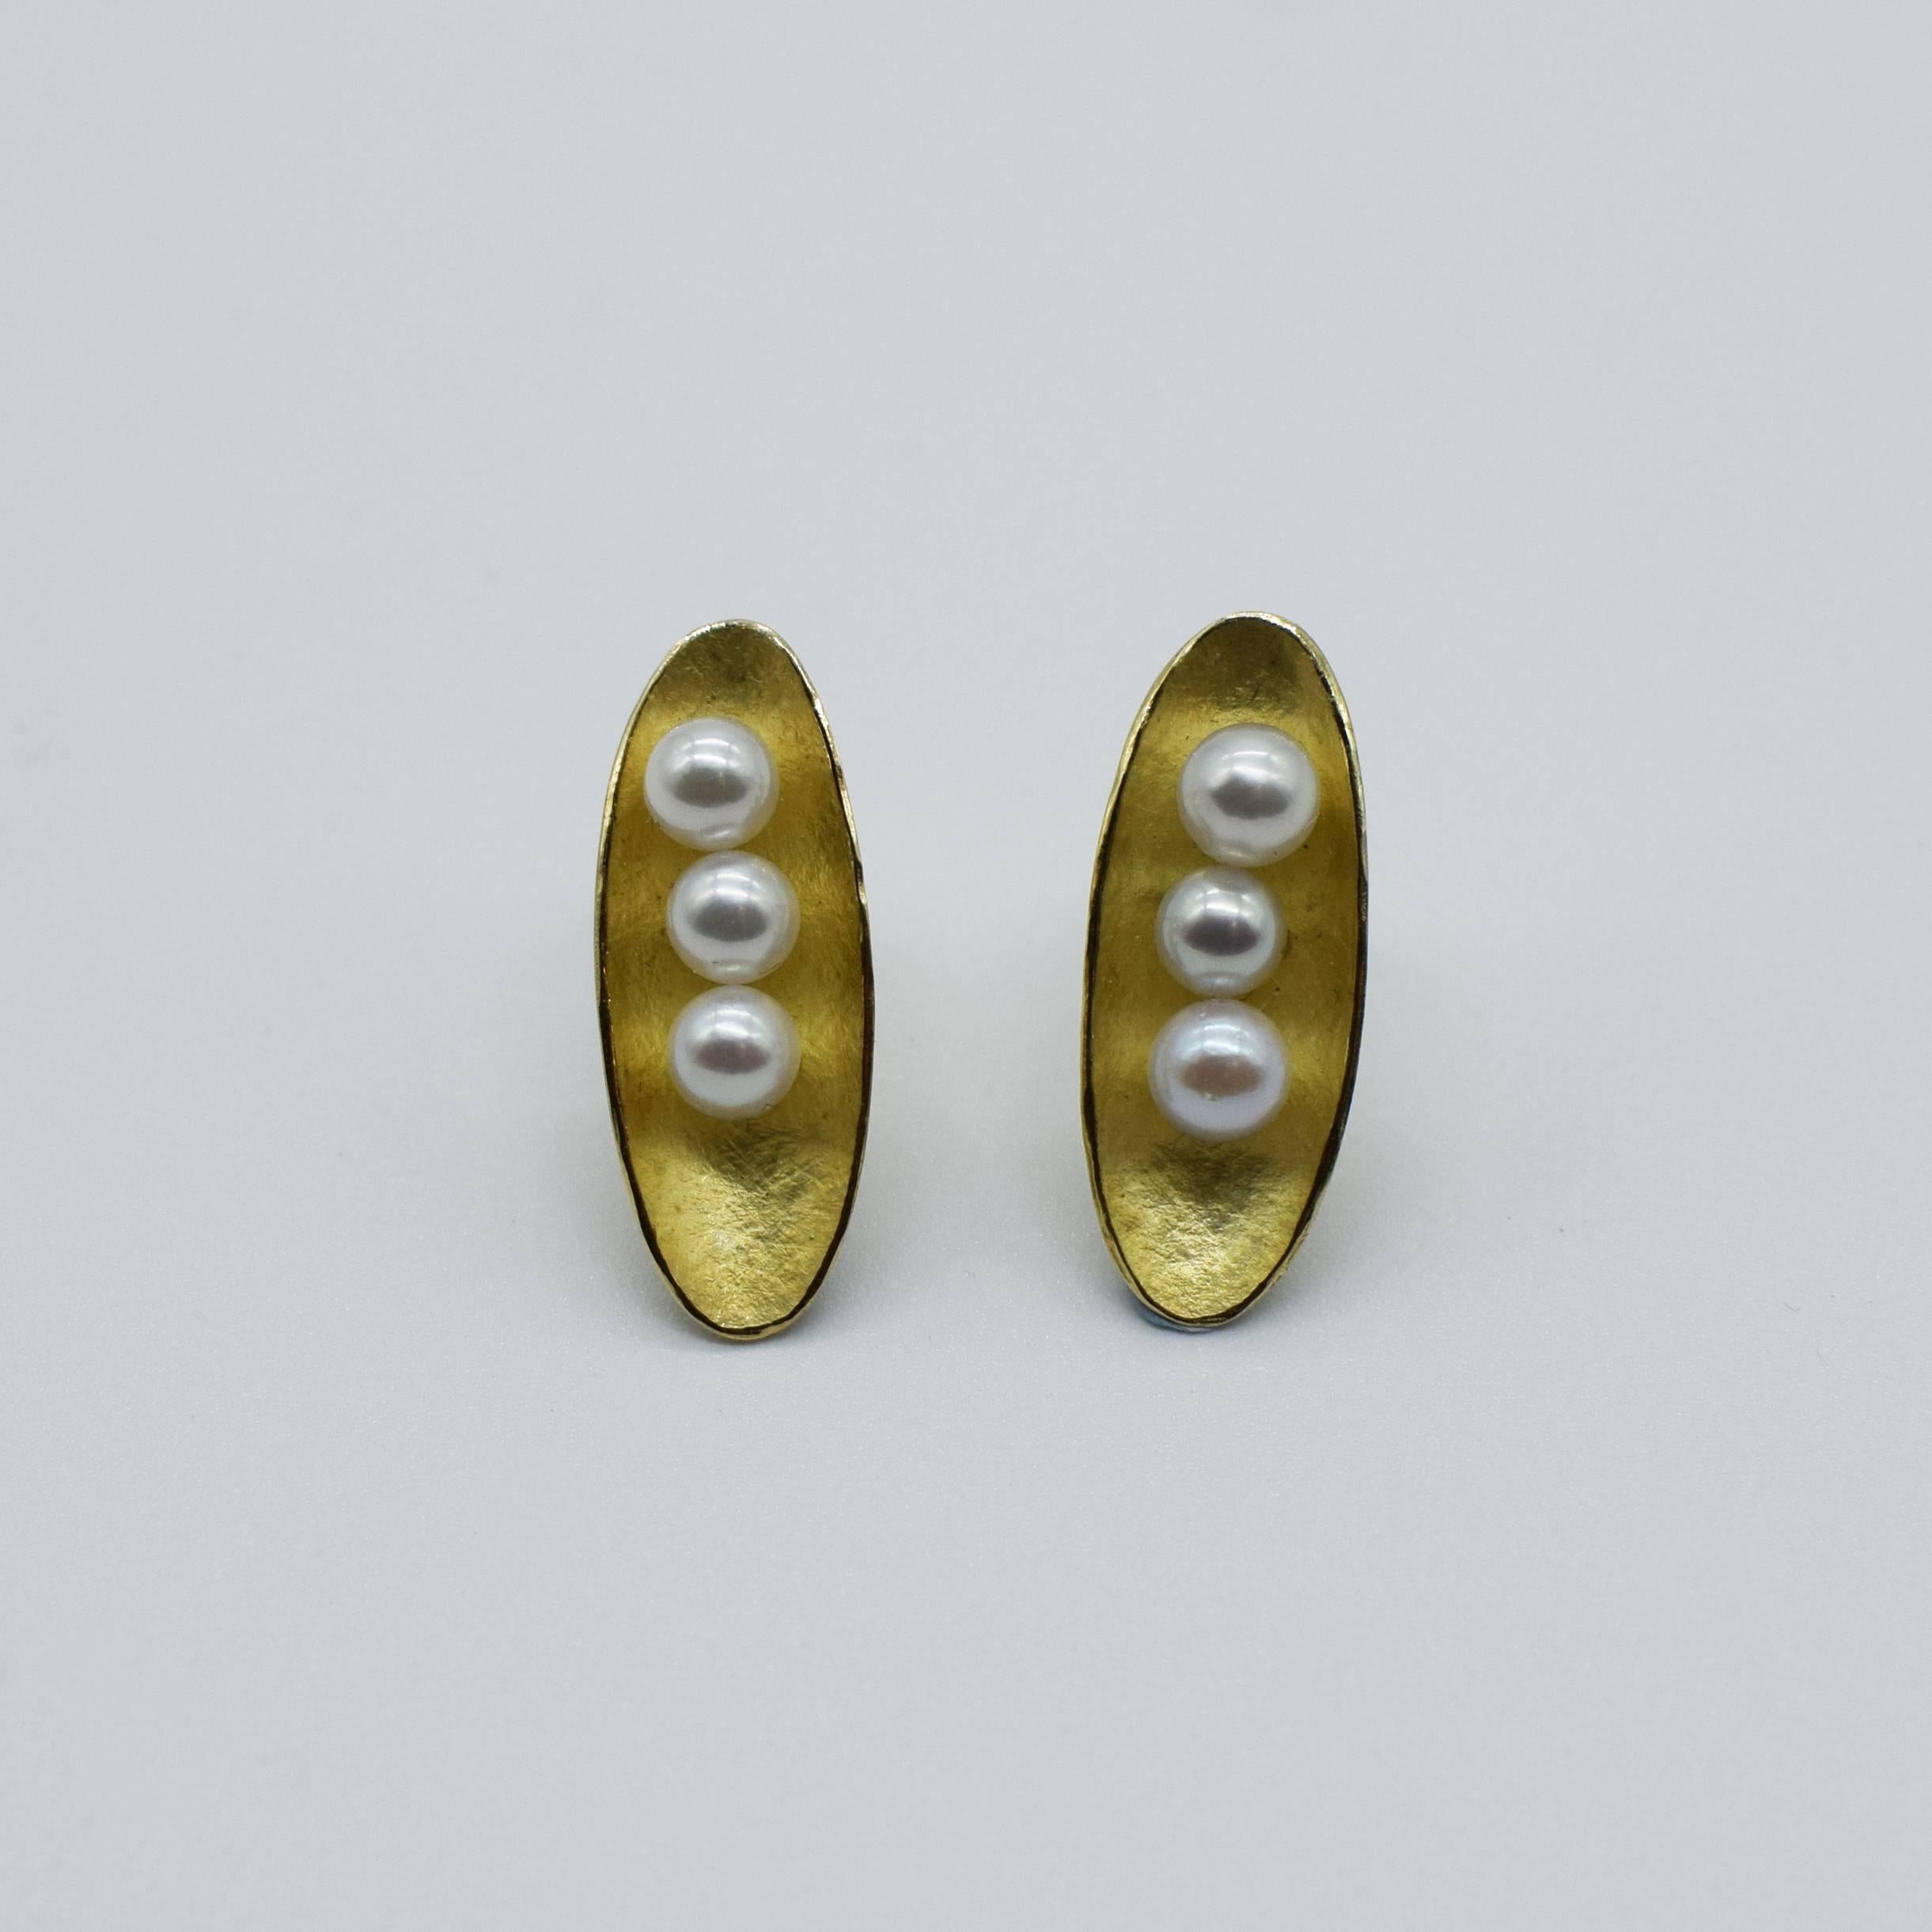 This 18ct gold and Akoya pearl earrings are all hand crafted.  Akoya pearls are cultured in Japan and they have a high luster. The earring have a delicate texture of gold that gives a soft warm feel to the piece, with only the polished edges